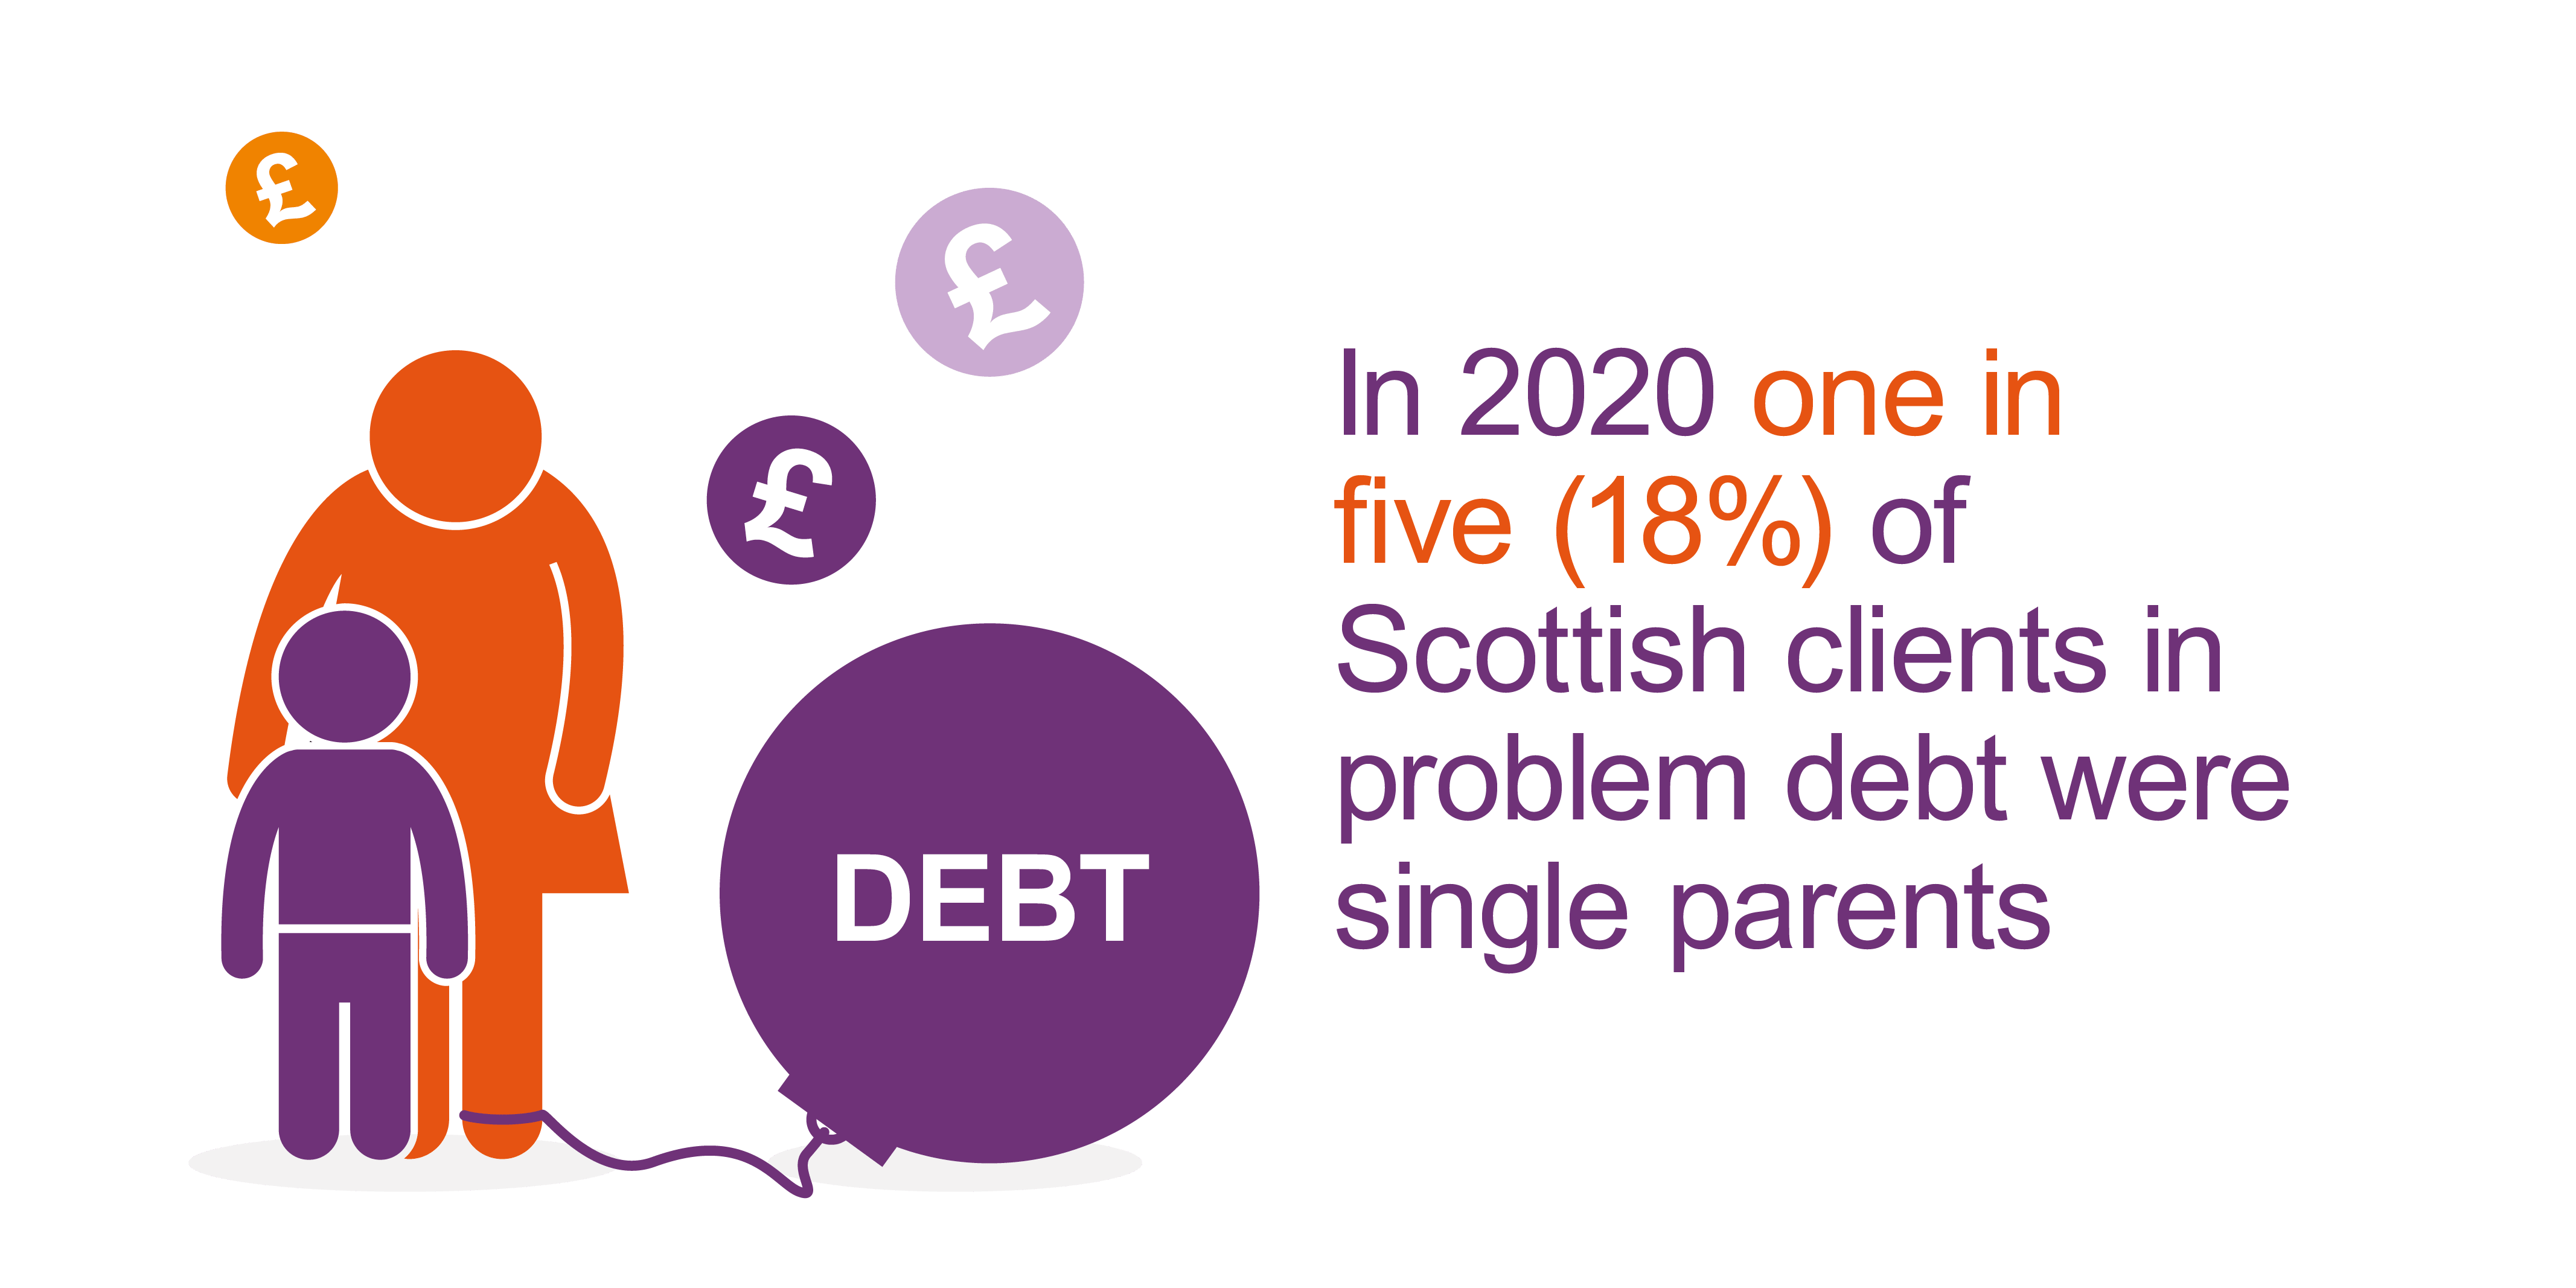 One in five (18%) of Scottish clients in problem debt were single parents 